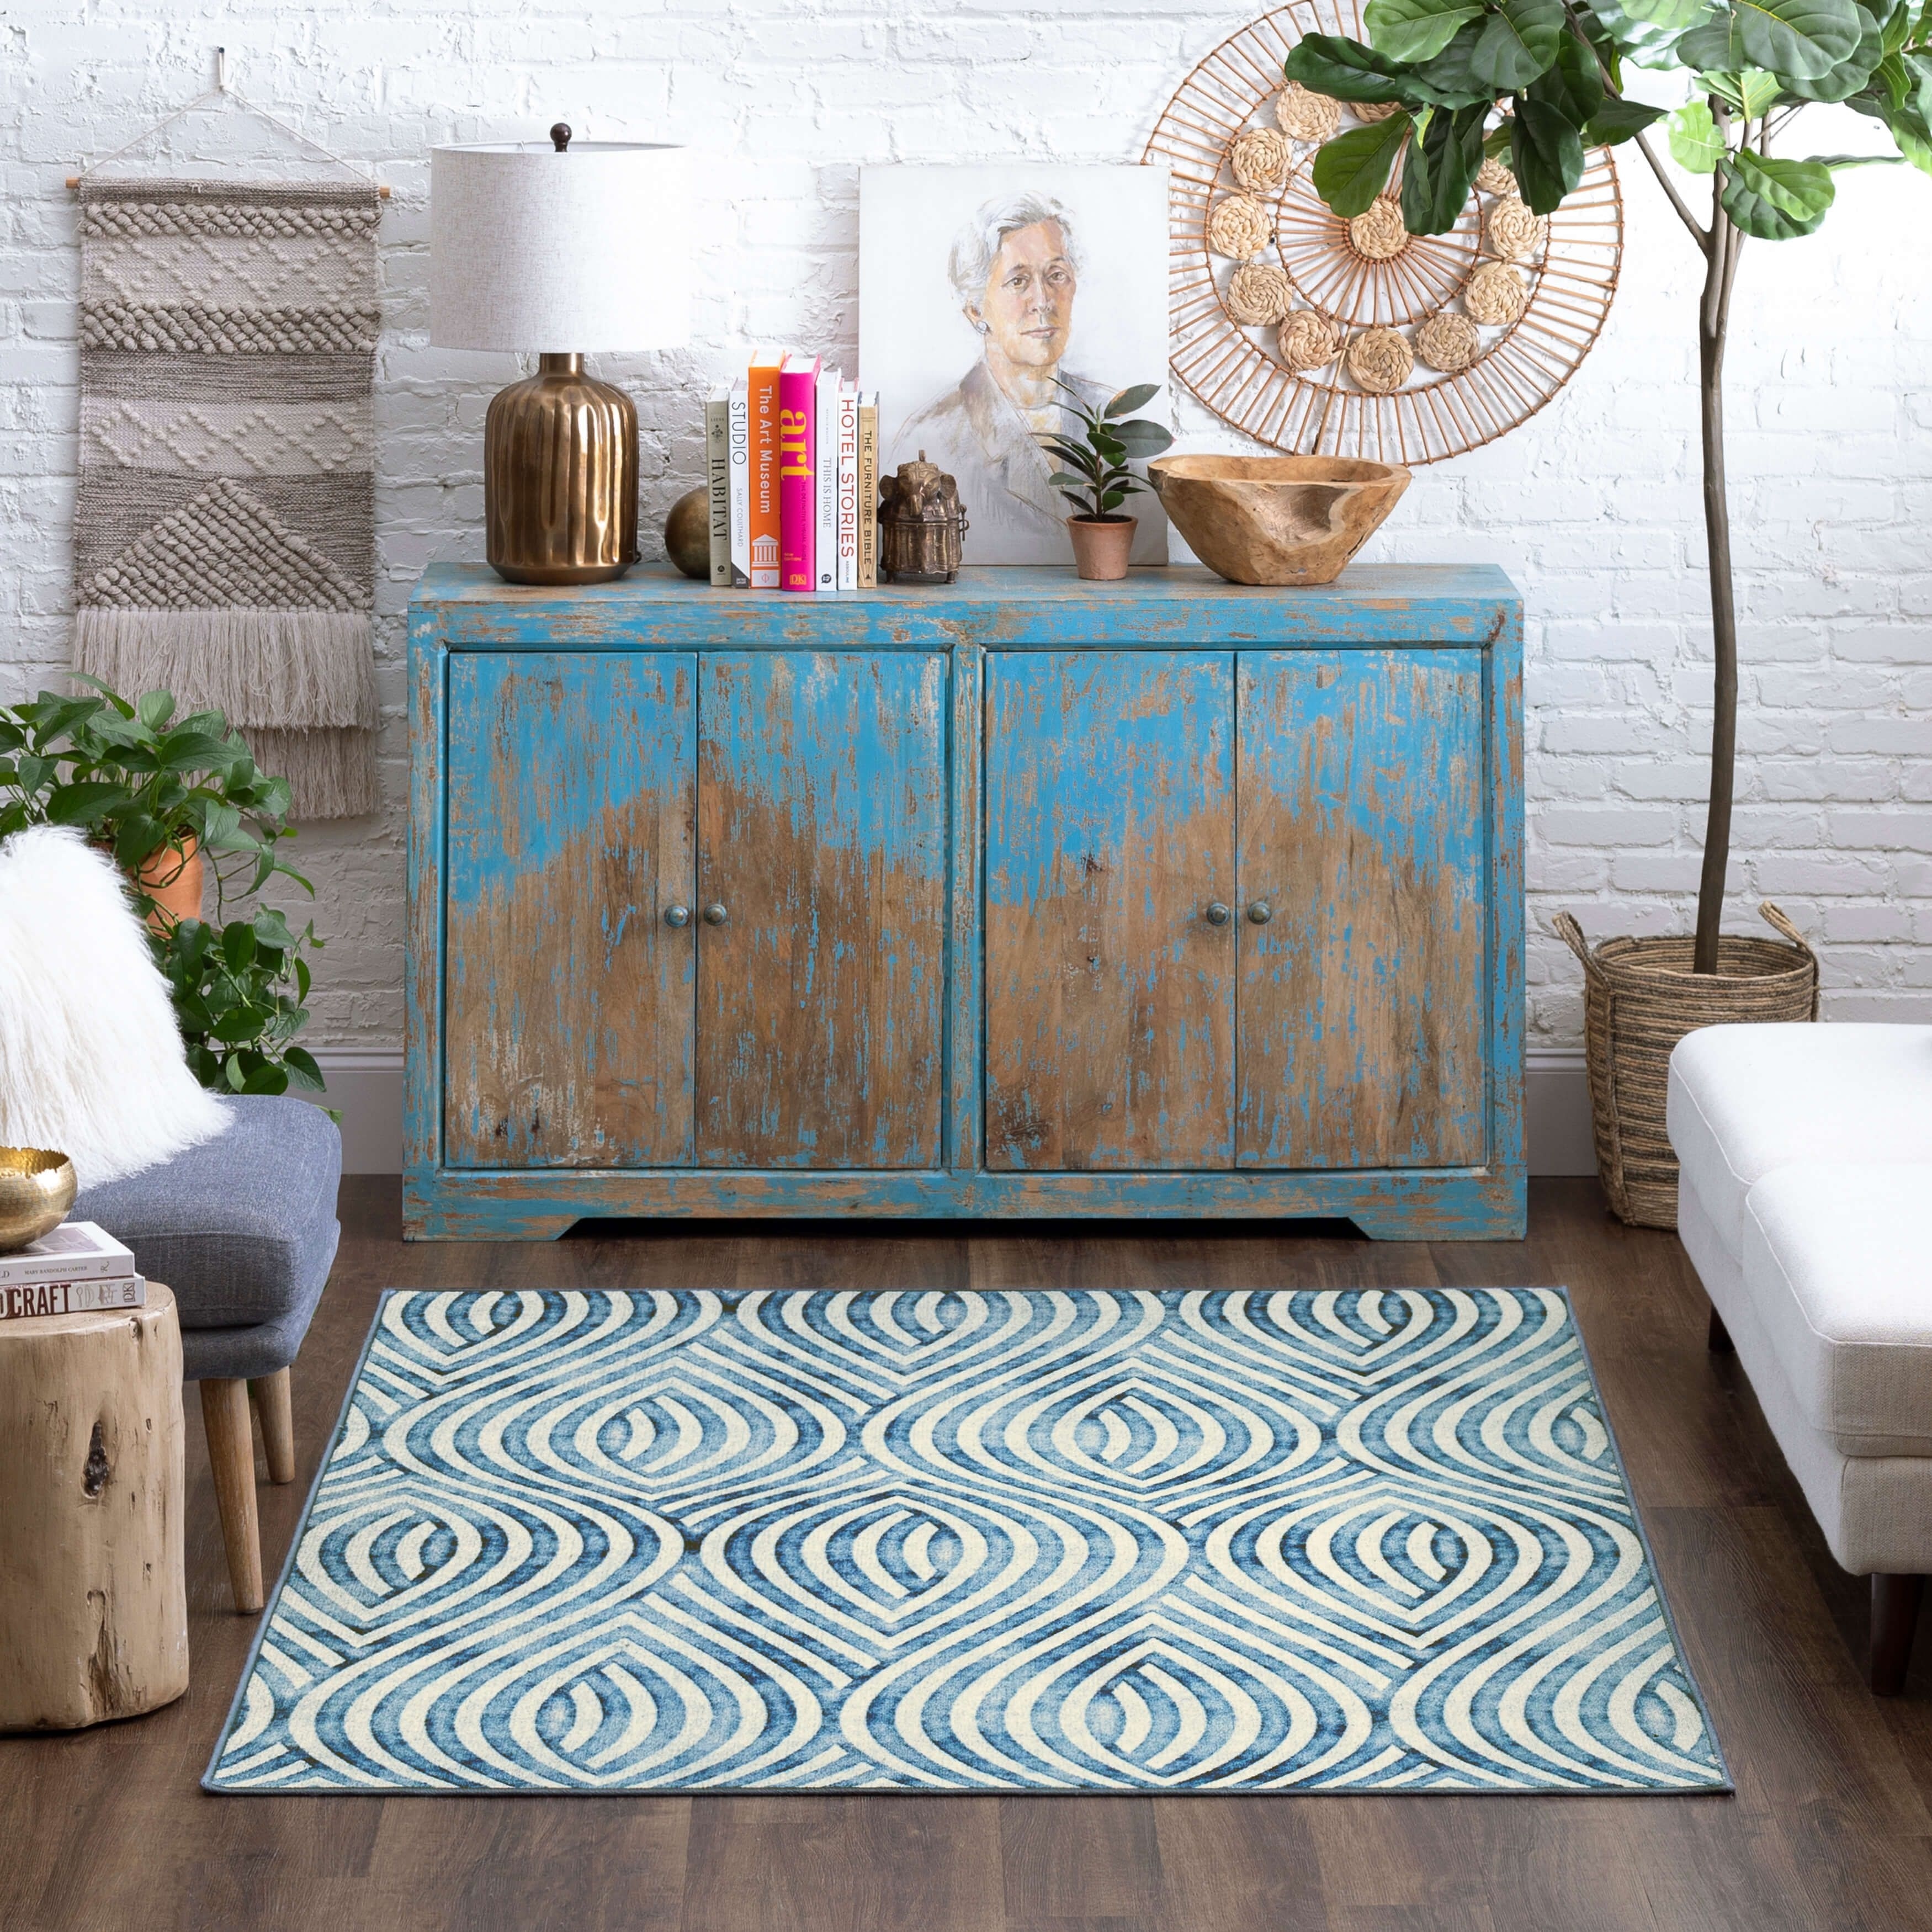 https://ak1.ostkcdn.com/images/products/is/images/direct/bc4e9b99afdbf1f59fa513c5e1f542b7c865a4df/Mohawk-Home-Gordan-Blue-Area-Rug.jpg